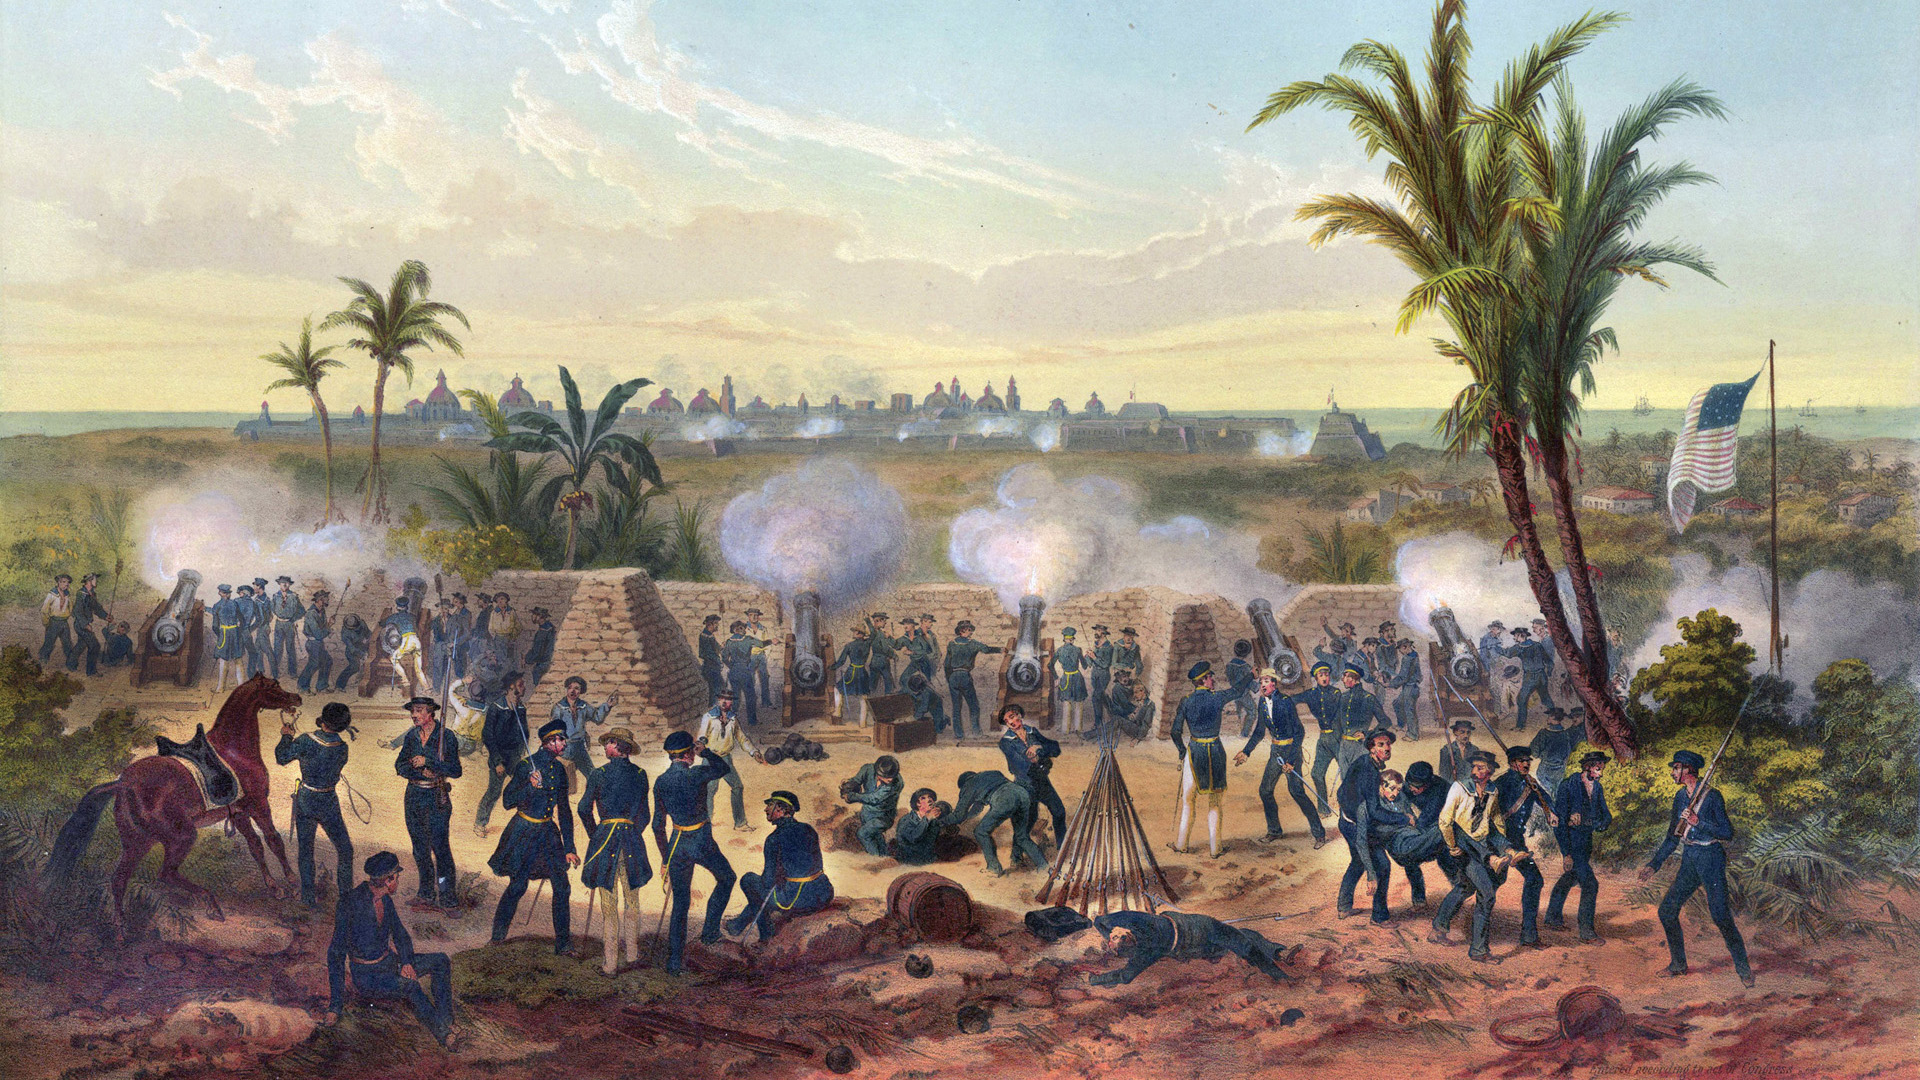 American artillery bombards the port town of Vera Cruz during the Mexican War. Smith Lee was in charge of a 24-pounder during the fight. Lee’s brother Robert also took part in the battle.